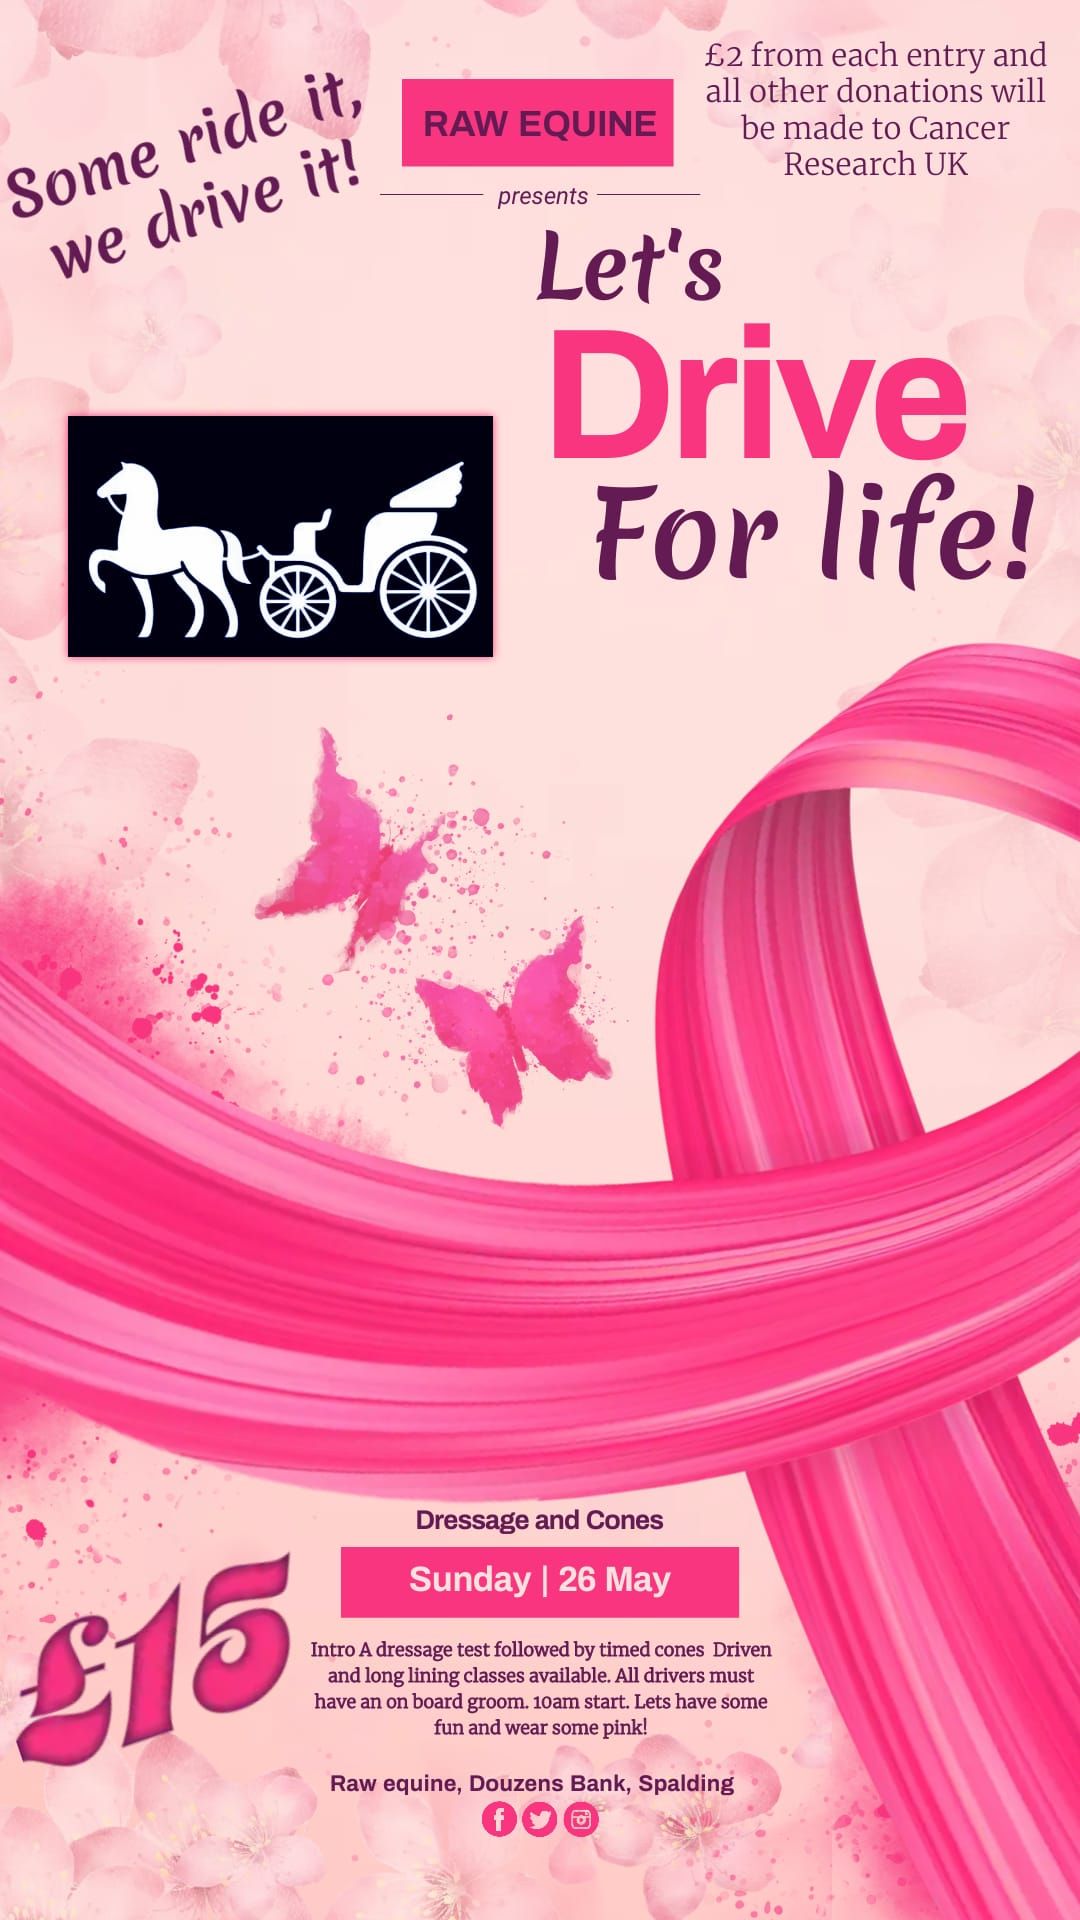 Let's Drive For Life in PINK! Driven & Long Lining Dressage